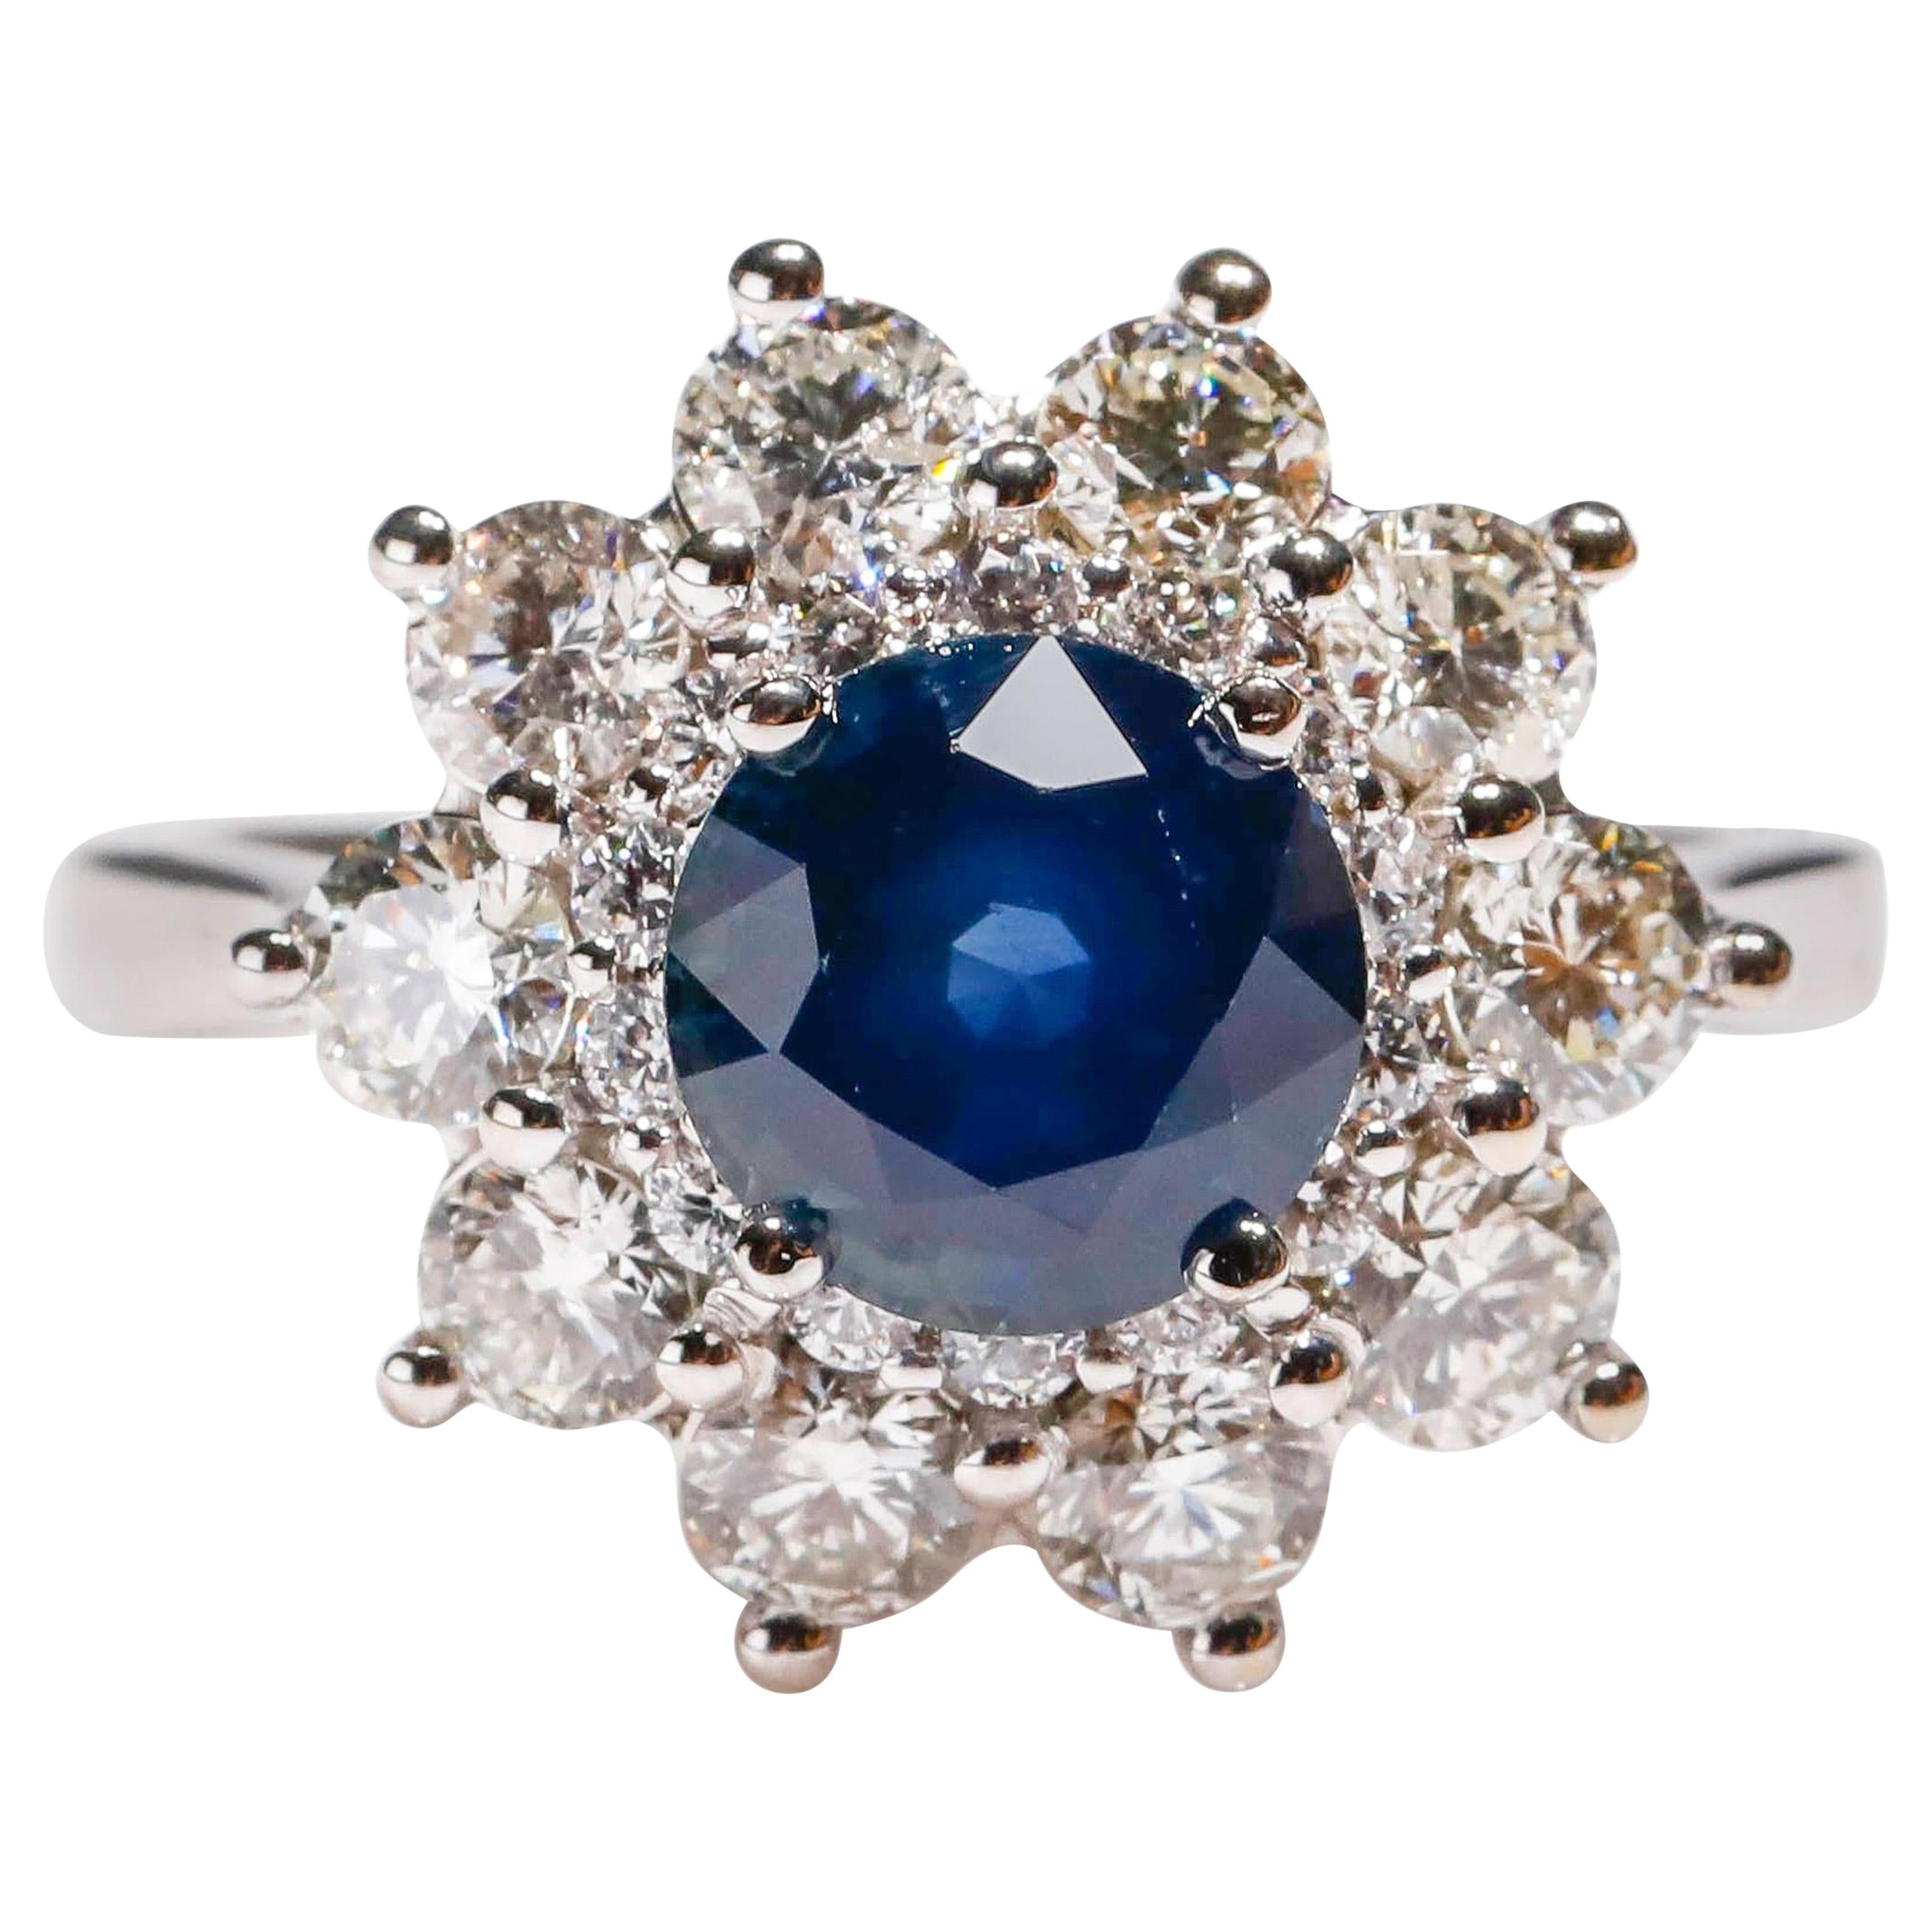 2.7 Carat Round Blue Sapphire 1.9 Carat Diamond 14 Karat Gold Floral Halo Ring

Crafted in 14 kt White Gold, this Unique design showcases a Blue Sapphire 2.7 TCW round-shaped Sapphire, set in a halo of round-cut mesmerizing diamonds, Polished to a